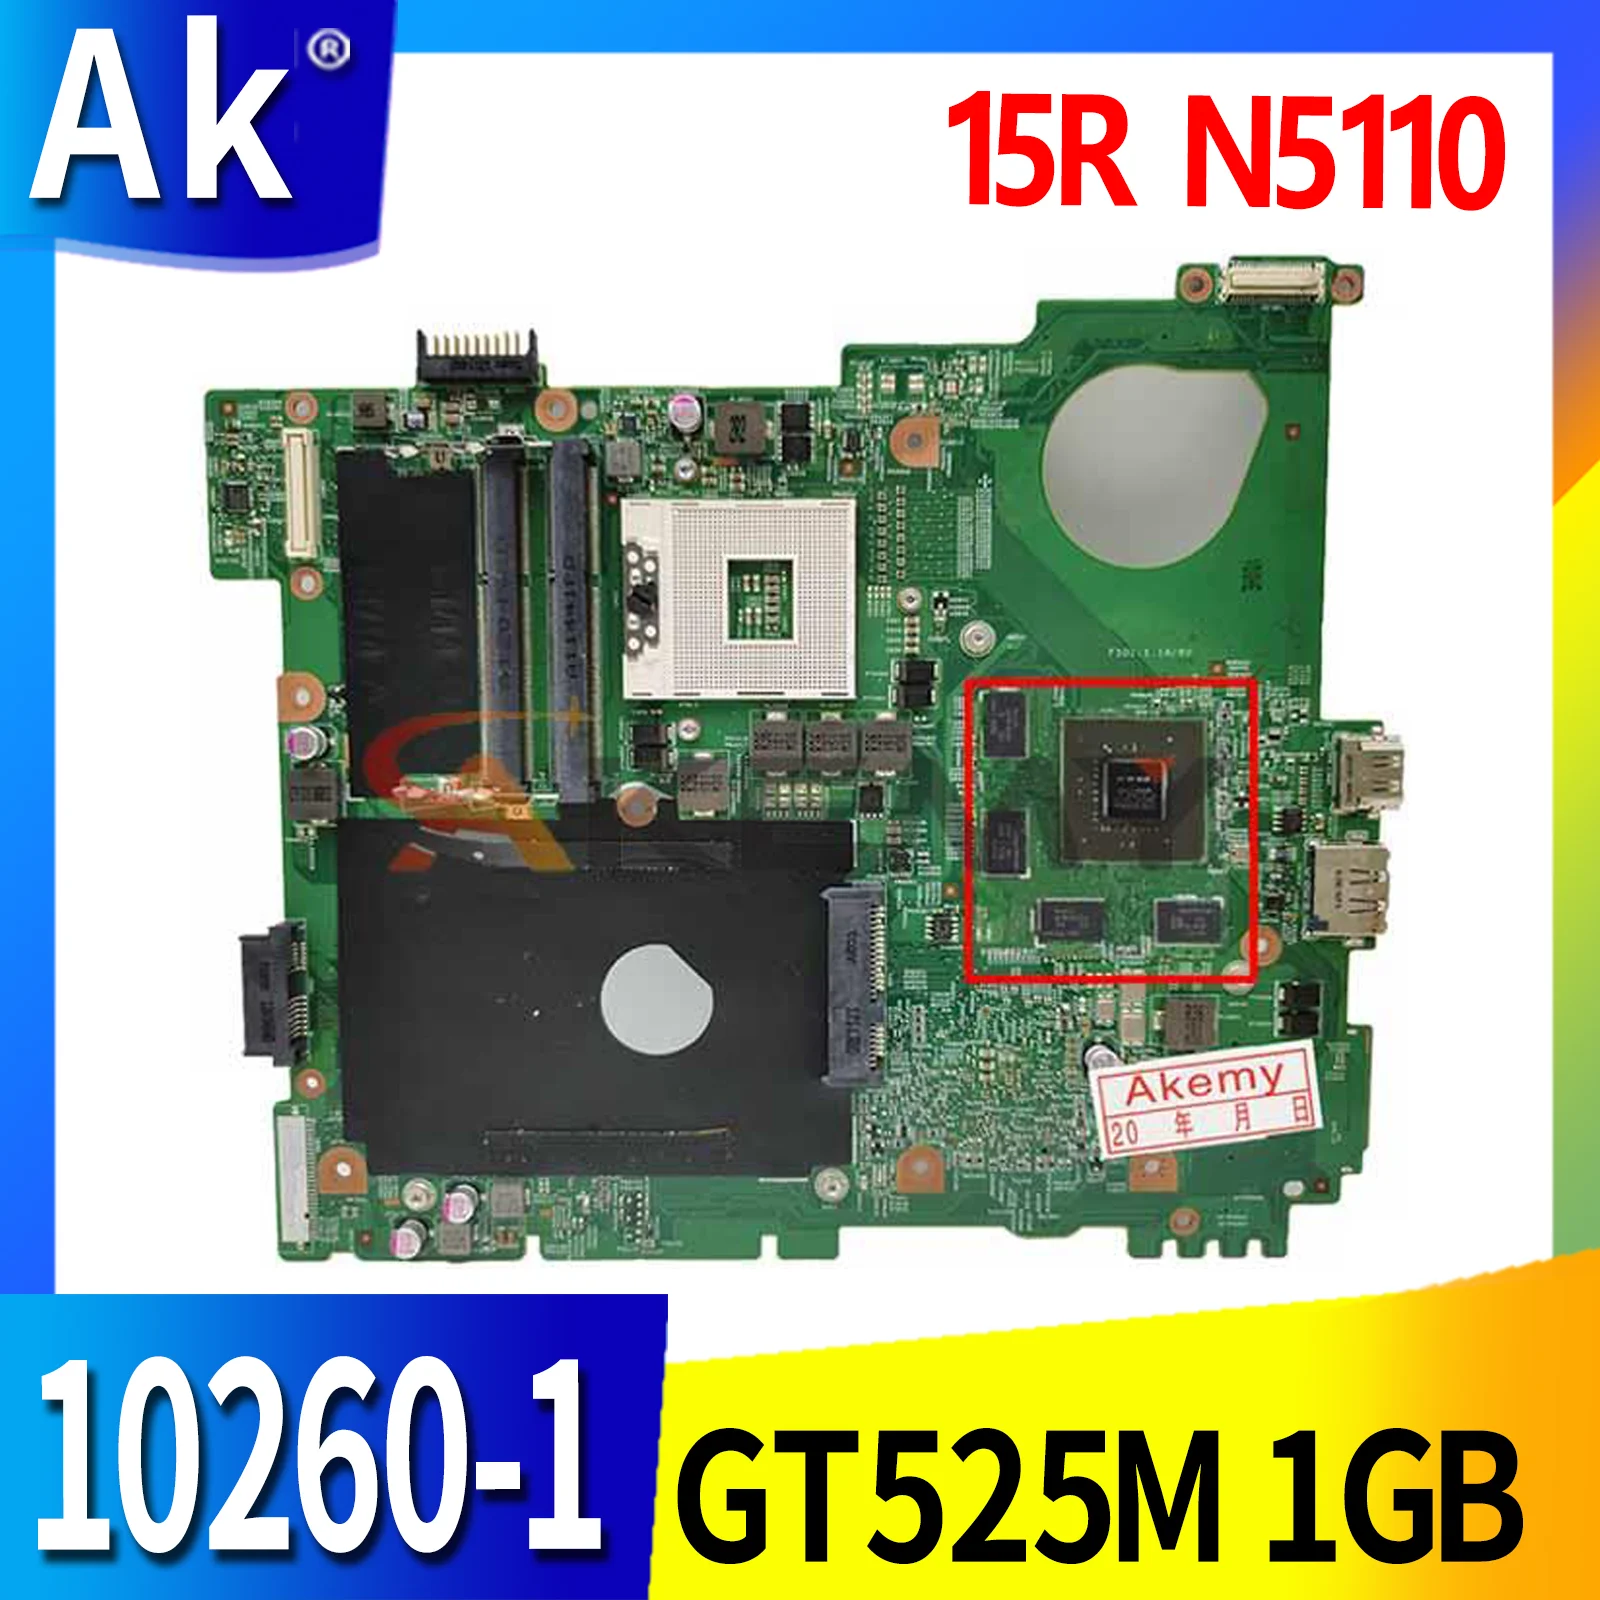 

CN-0J2WW8 0J2WW8 Laptop motherboard For DELL Inspiron 15R N5110 GT525M 1GB HM67 Notebook Mainboard 10260-1 N12P-GE-A1 DDR3